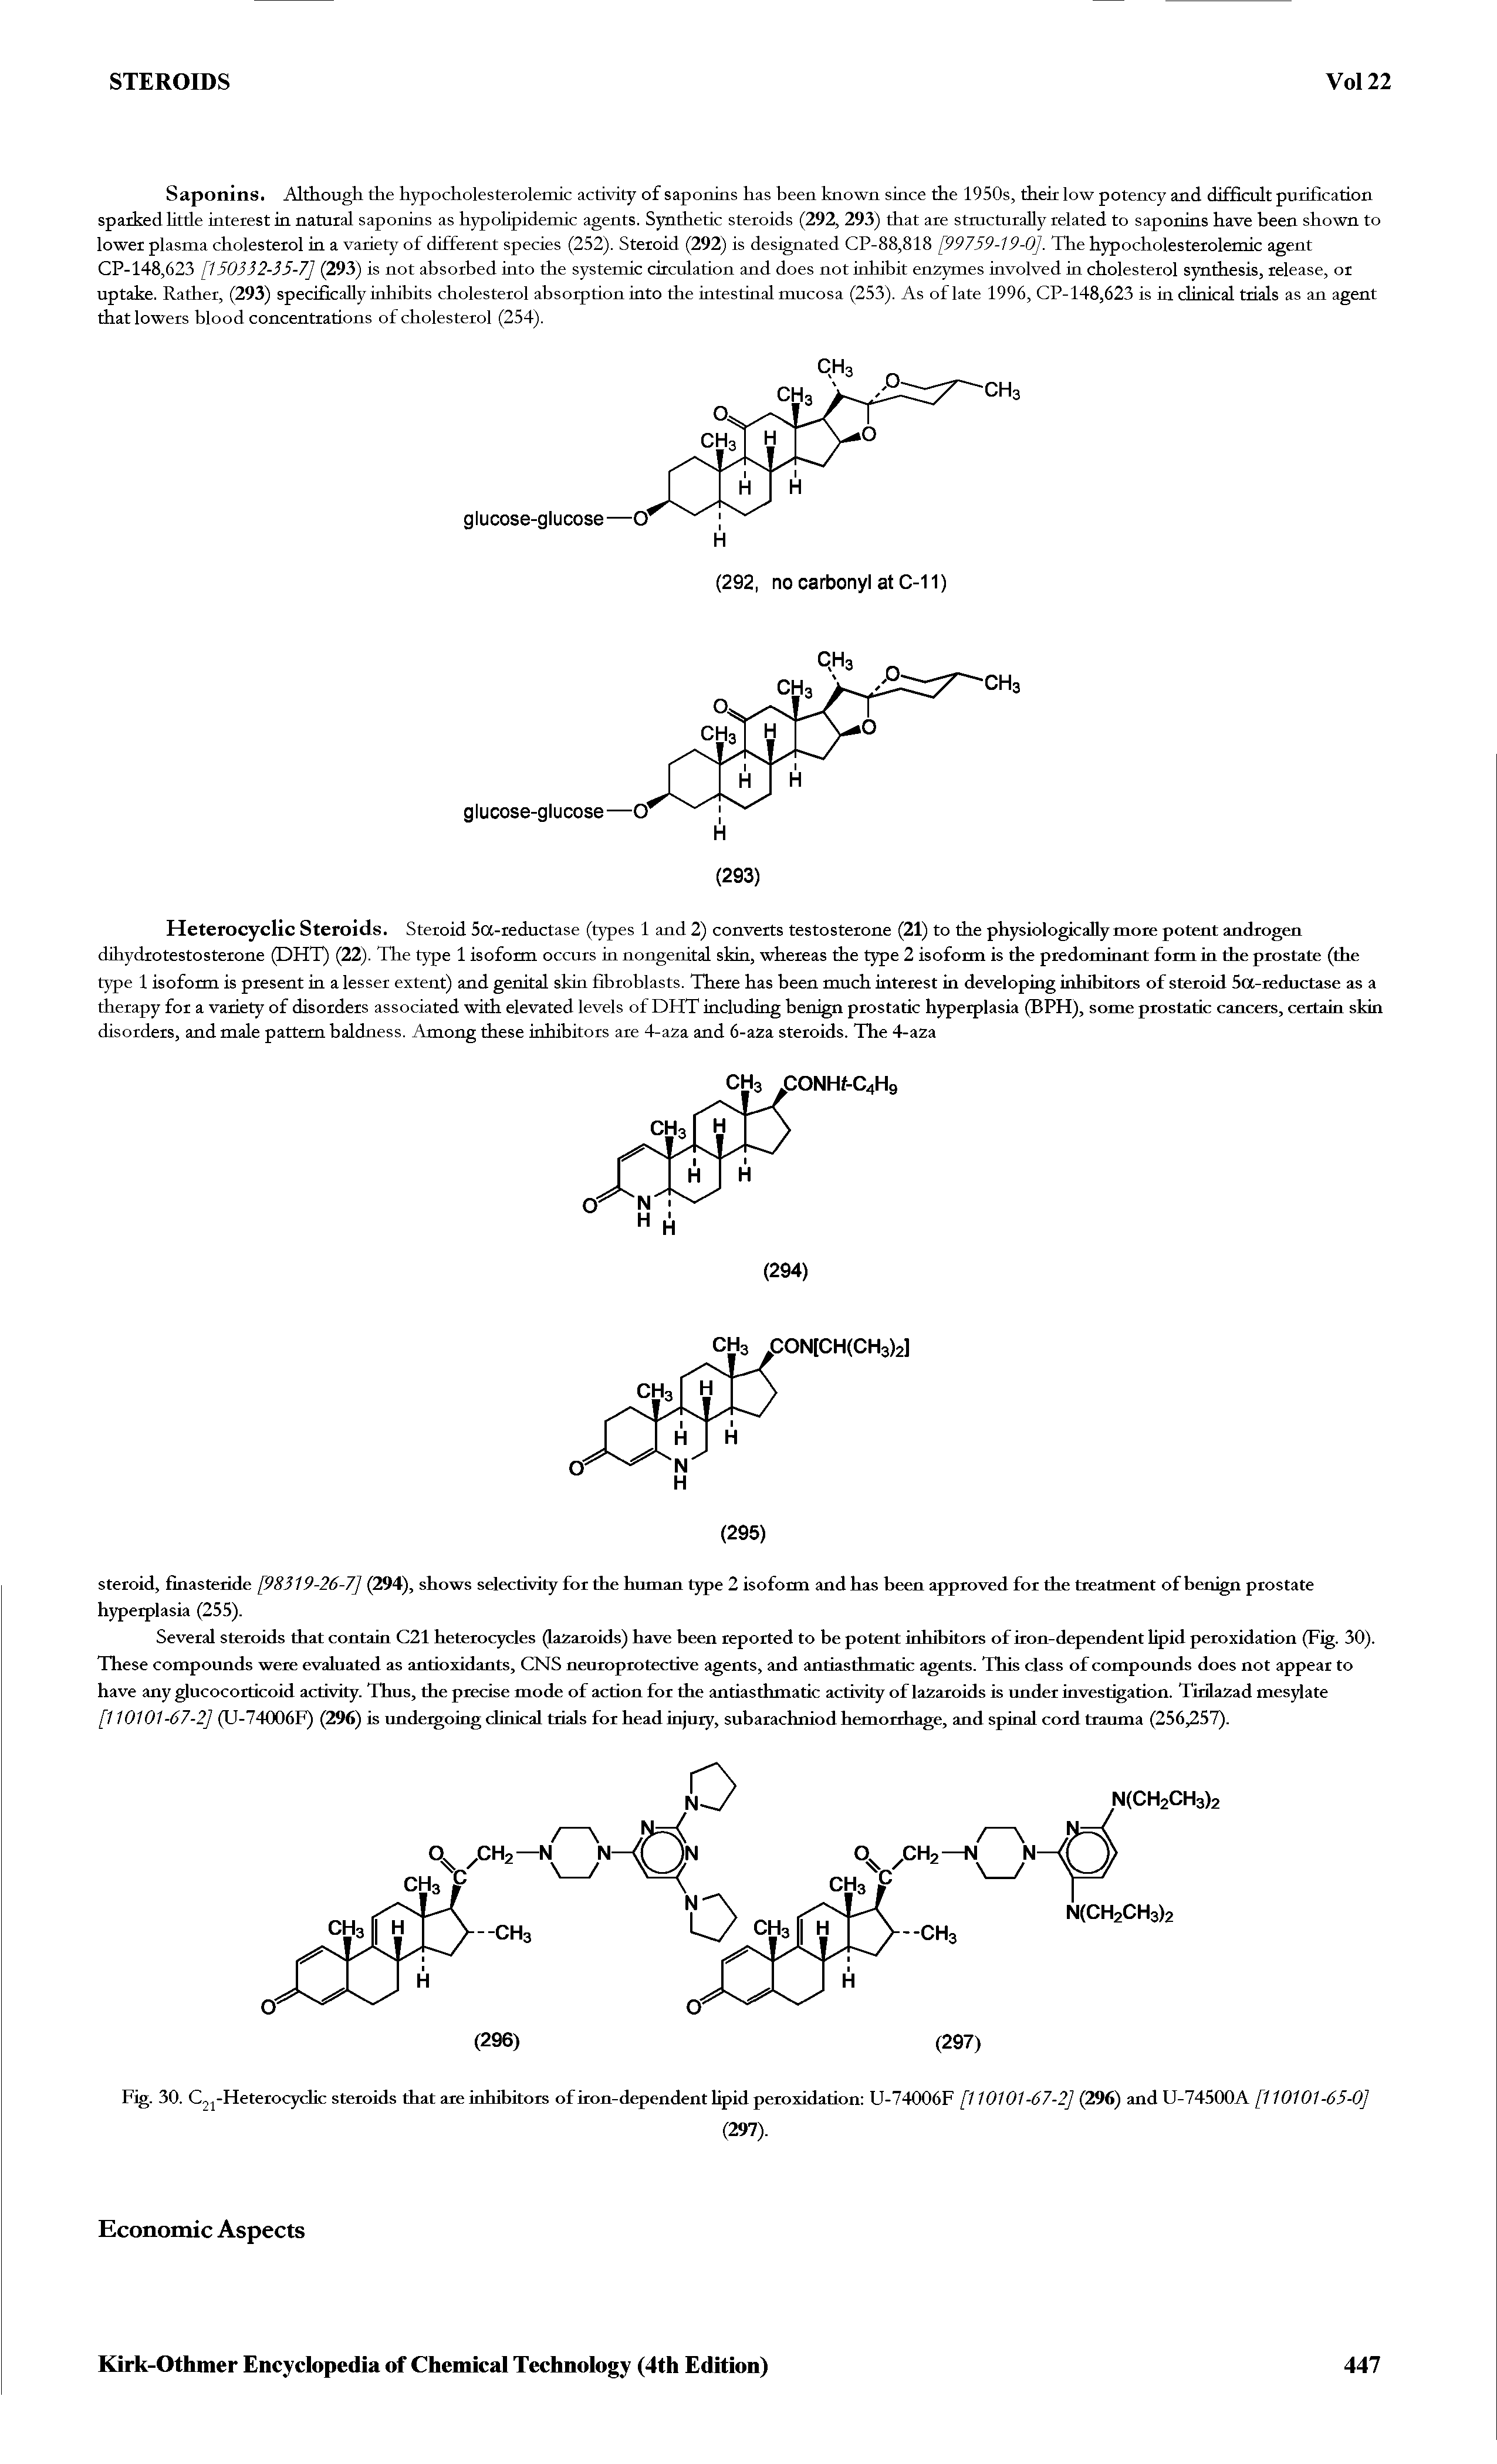 Fig. 30. C21-Heterocyclic steroids that are inhibitors of iron-dependent lipid peroxidation U-74006F [110101-67-2] (296) and U-74500A [110101-65-0]...